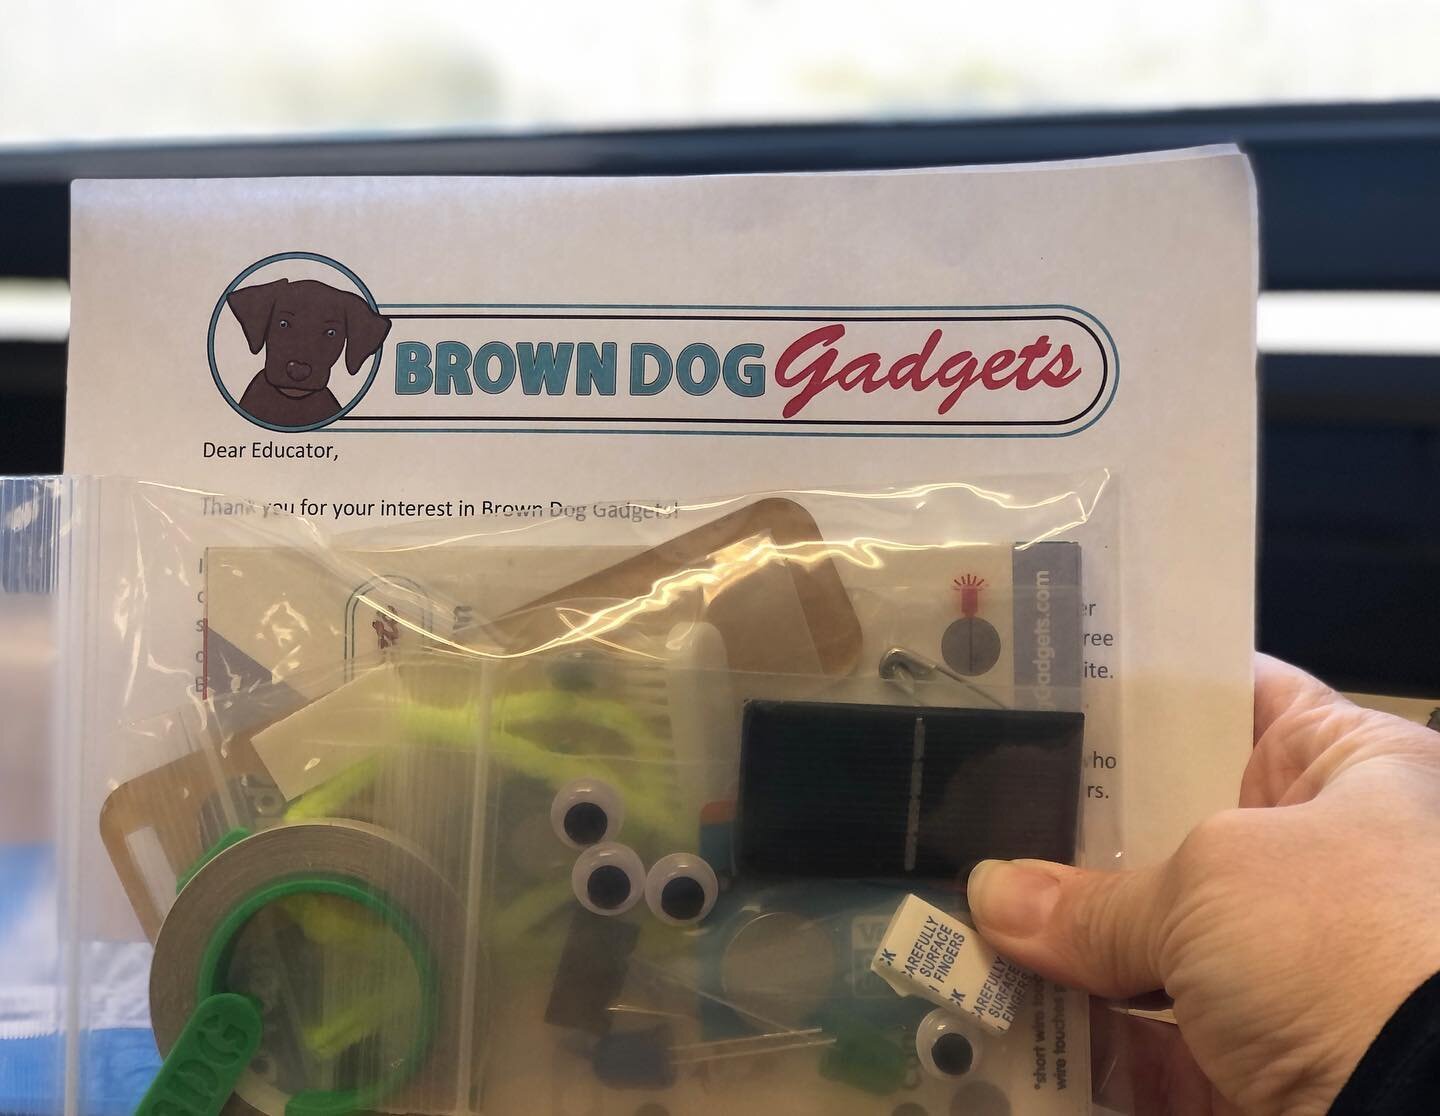 Thanks @browndoggadgets! Love the #bristlebots already and cannot wait to try some of the other samples ⚙️❤️ Definitely need a 3D printed holder for my own rolls of copper tape like what you send with the conductive tape - very cool!⁣
⁣
⁣
⁣
⁣
⁣
⁣
⁣
⁣